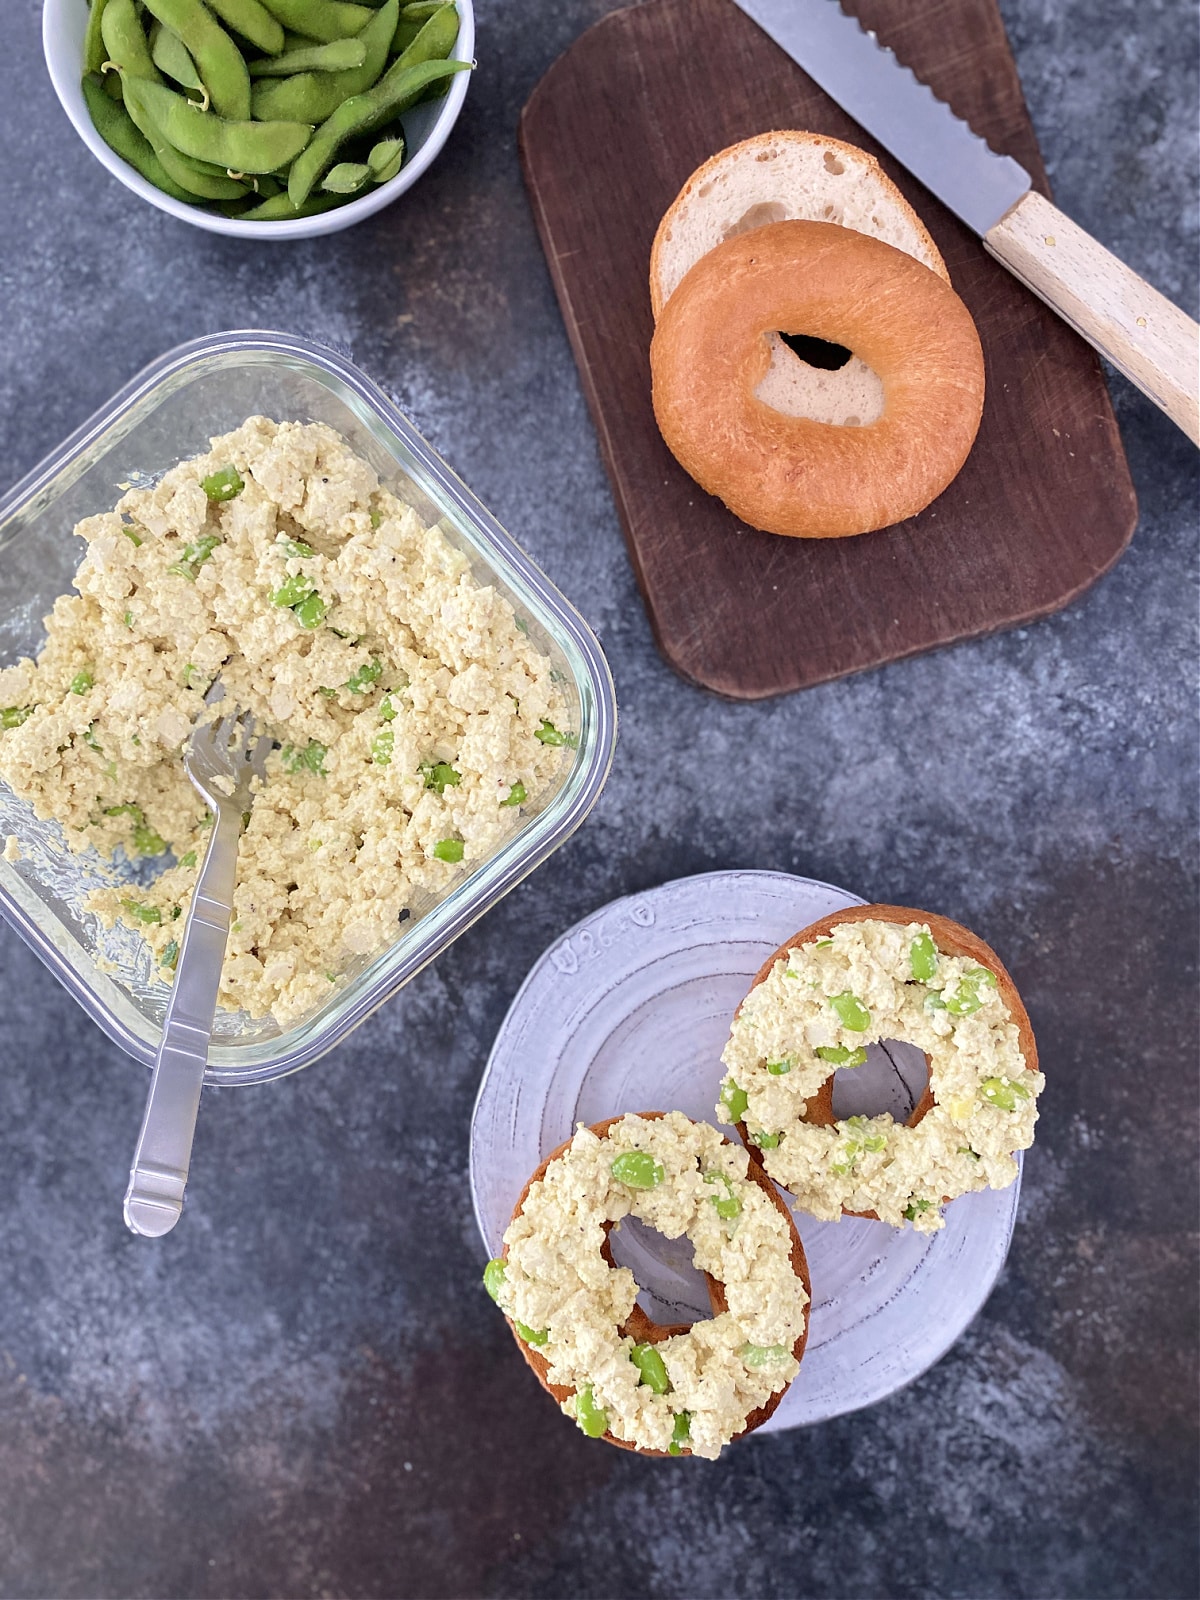 Overhead view of vegan edamame egg salad in a square glass container, with a small bowl of unshelled edamame, a small cutting board with a bagel and knife, and a plate with a toasted sliced bagel topped with egg salad.